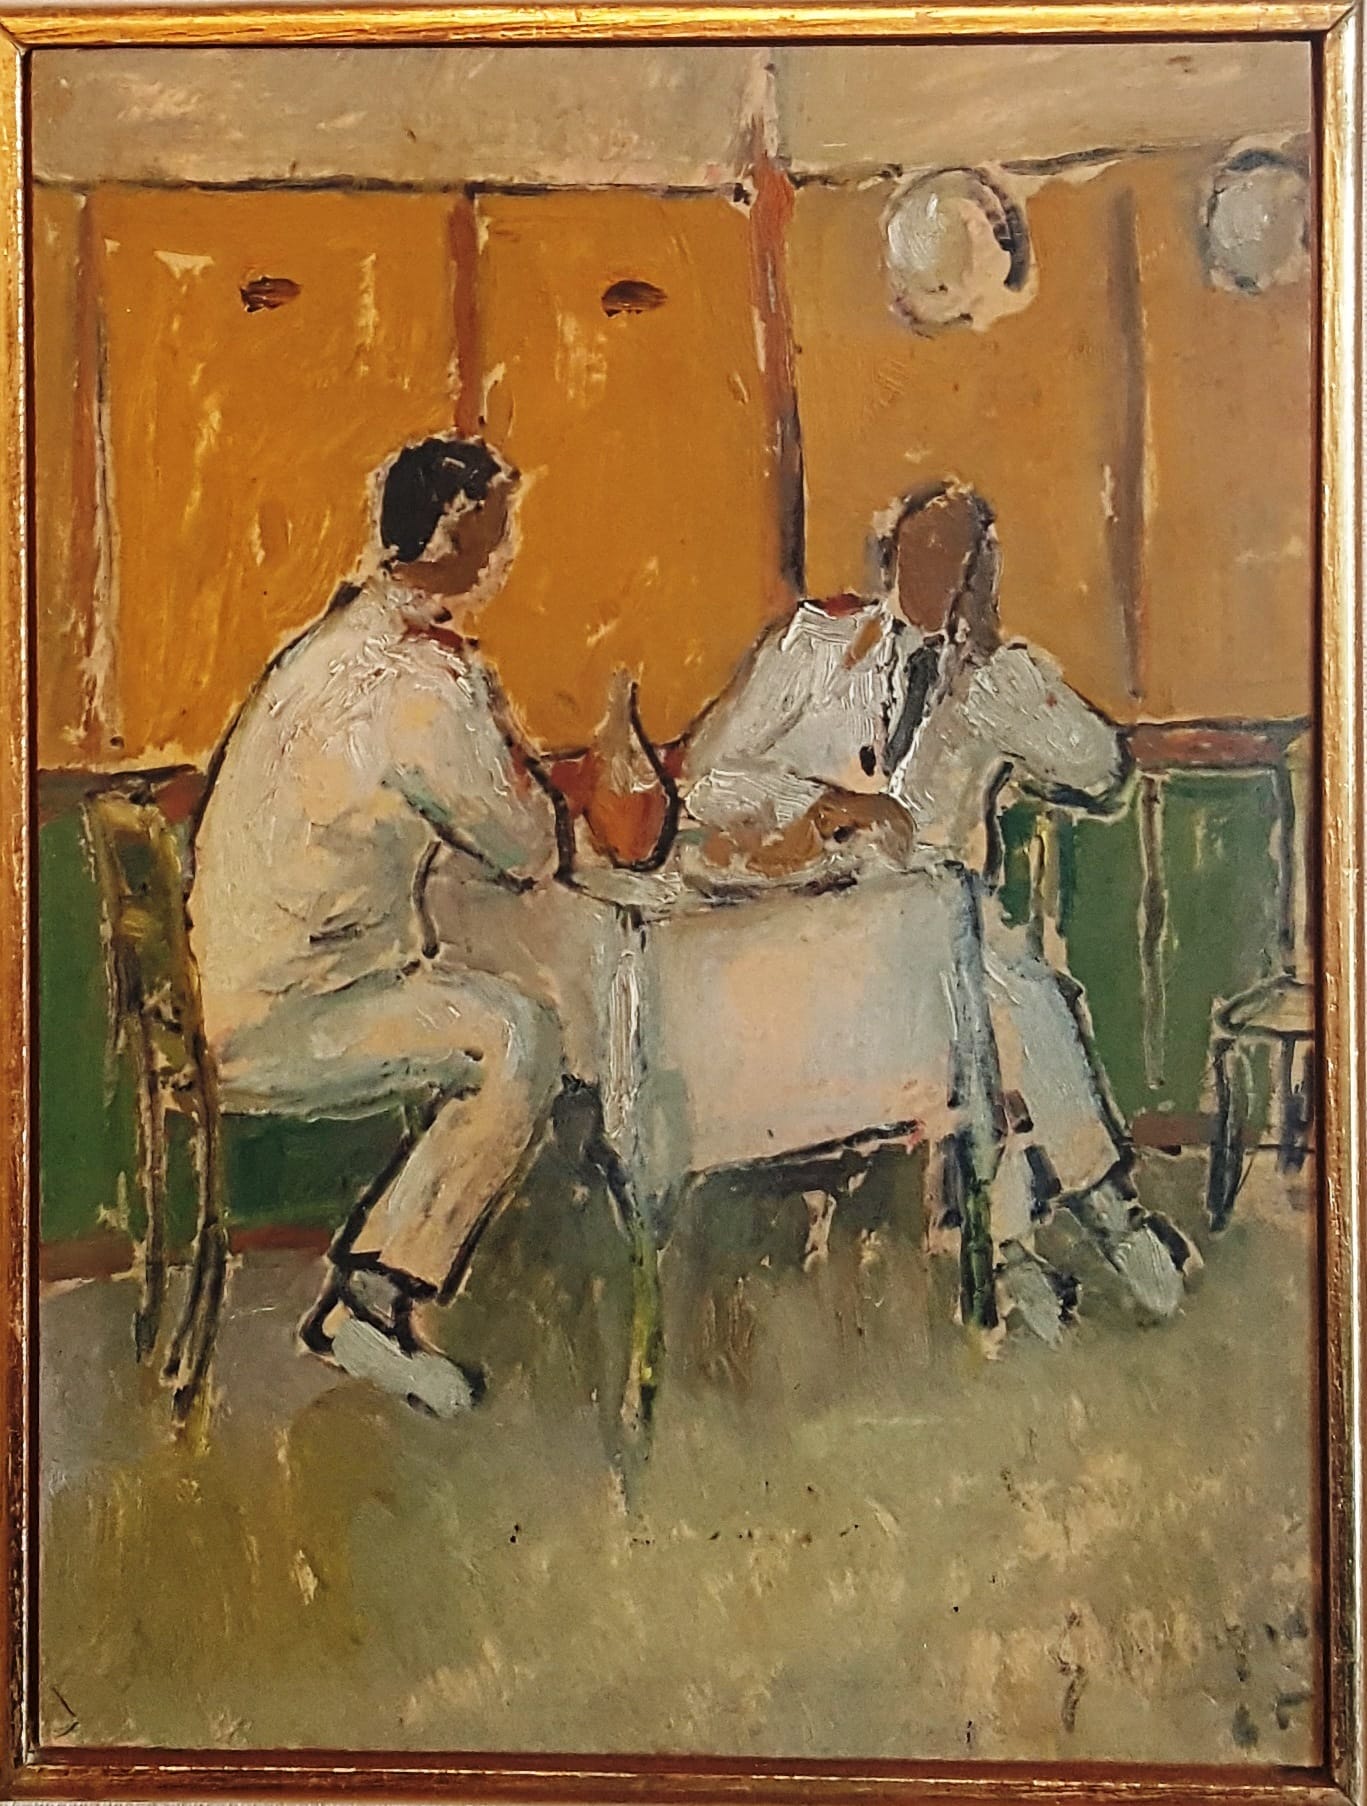 Malagodi's Conversation. Two men in white suits, sitting in a casual, relaxed posture, converse in a small dining room. The walls are yellow with green baseboard.